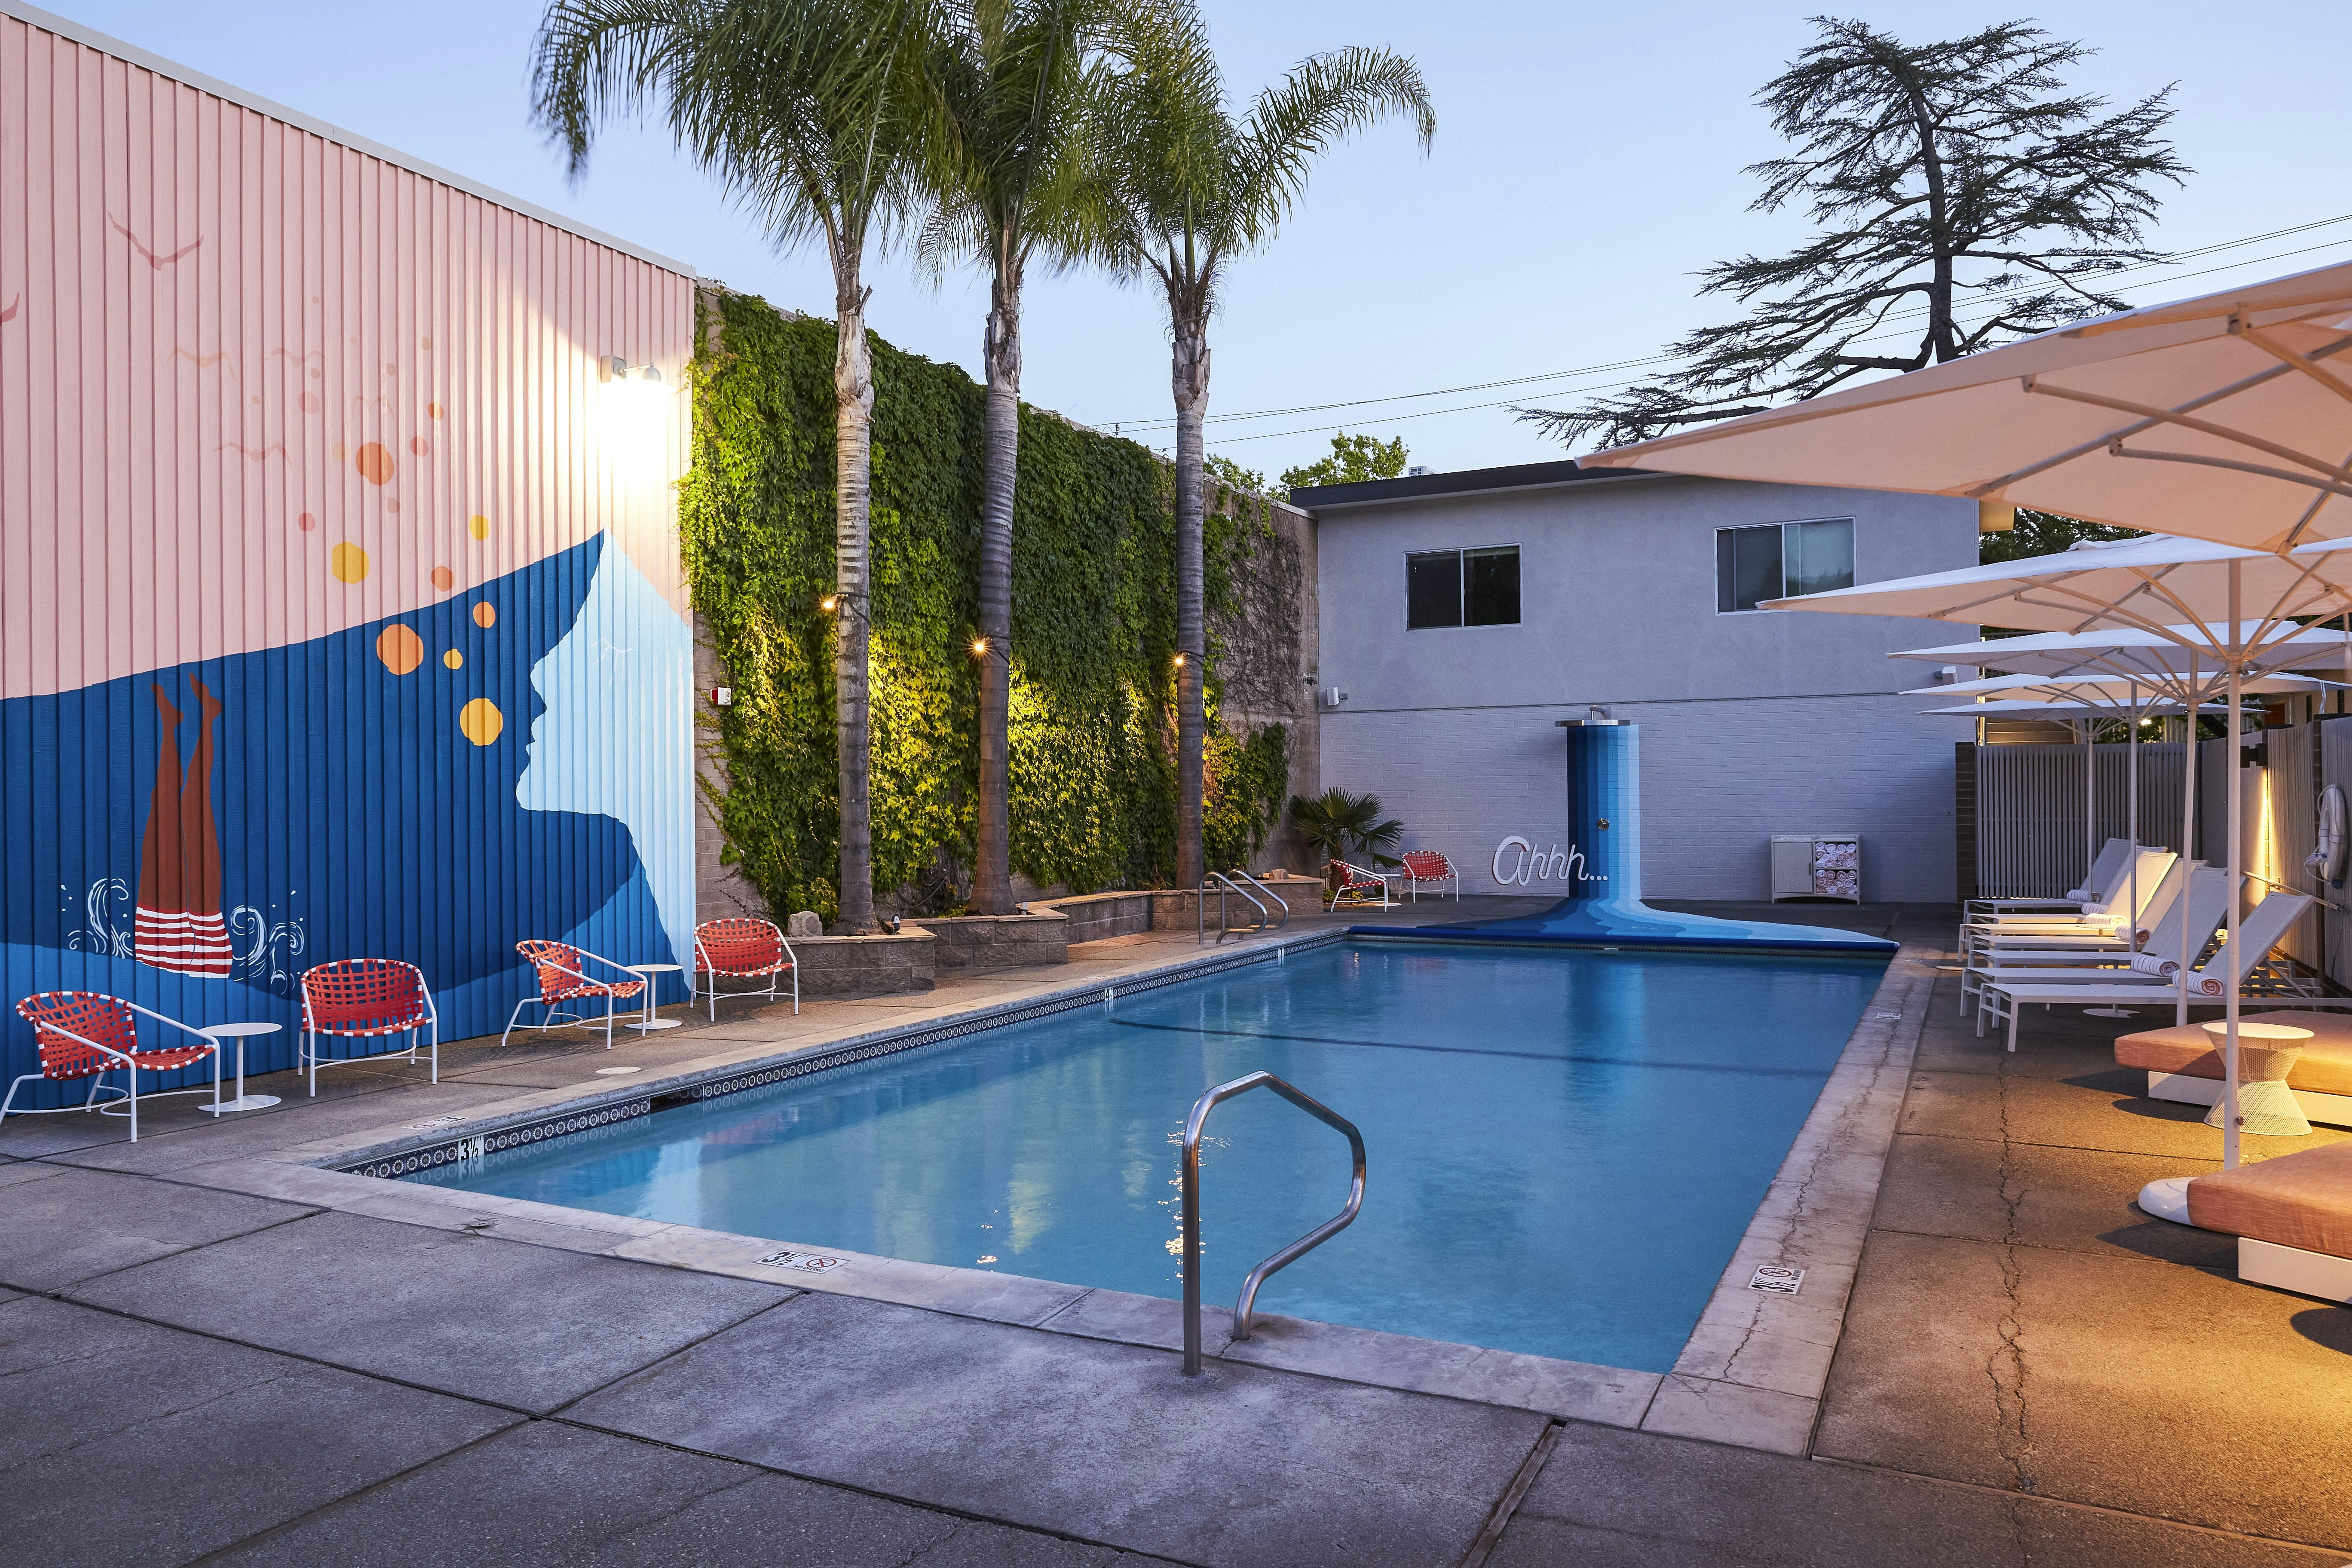 A shot of an outdoor swimming pool in the evening. There are colorful murals on the walls surrounding the pool 